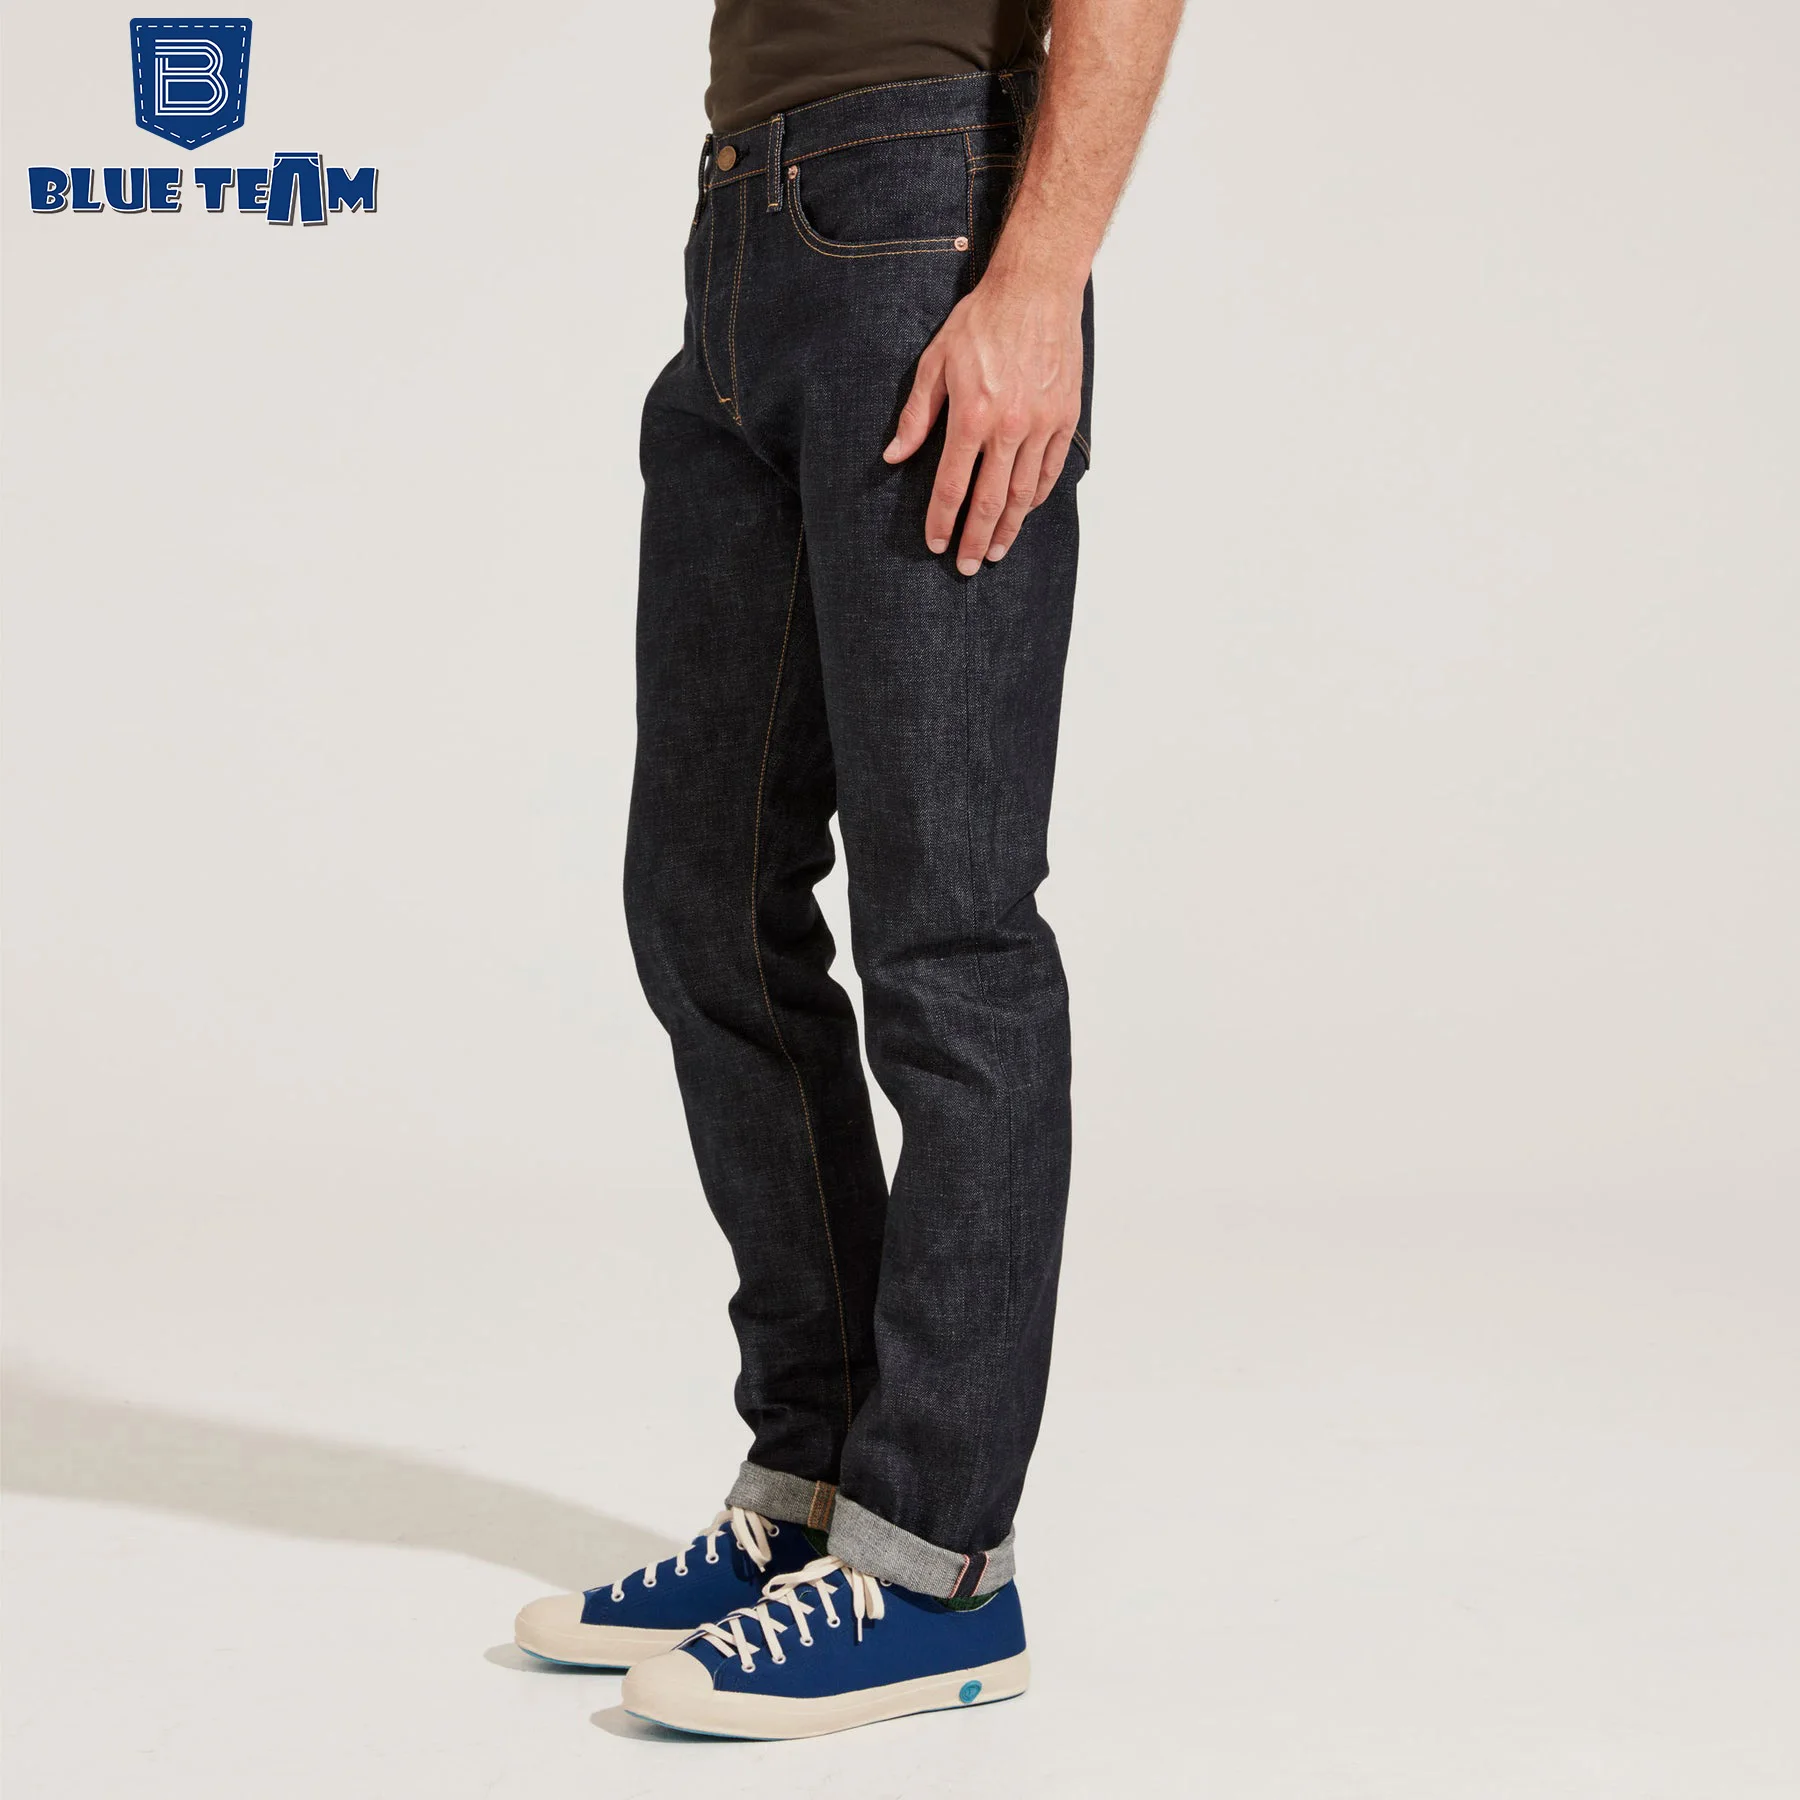 Best jeans for men 2021: Slim and loose fit designs